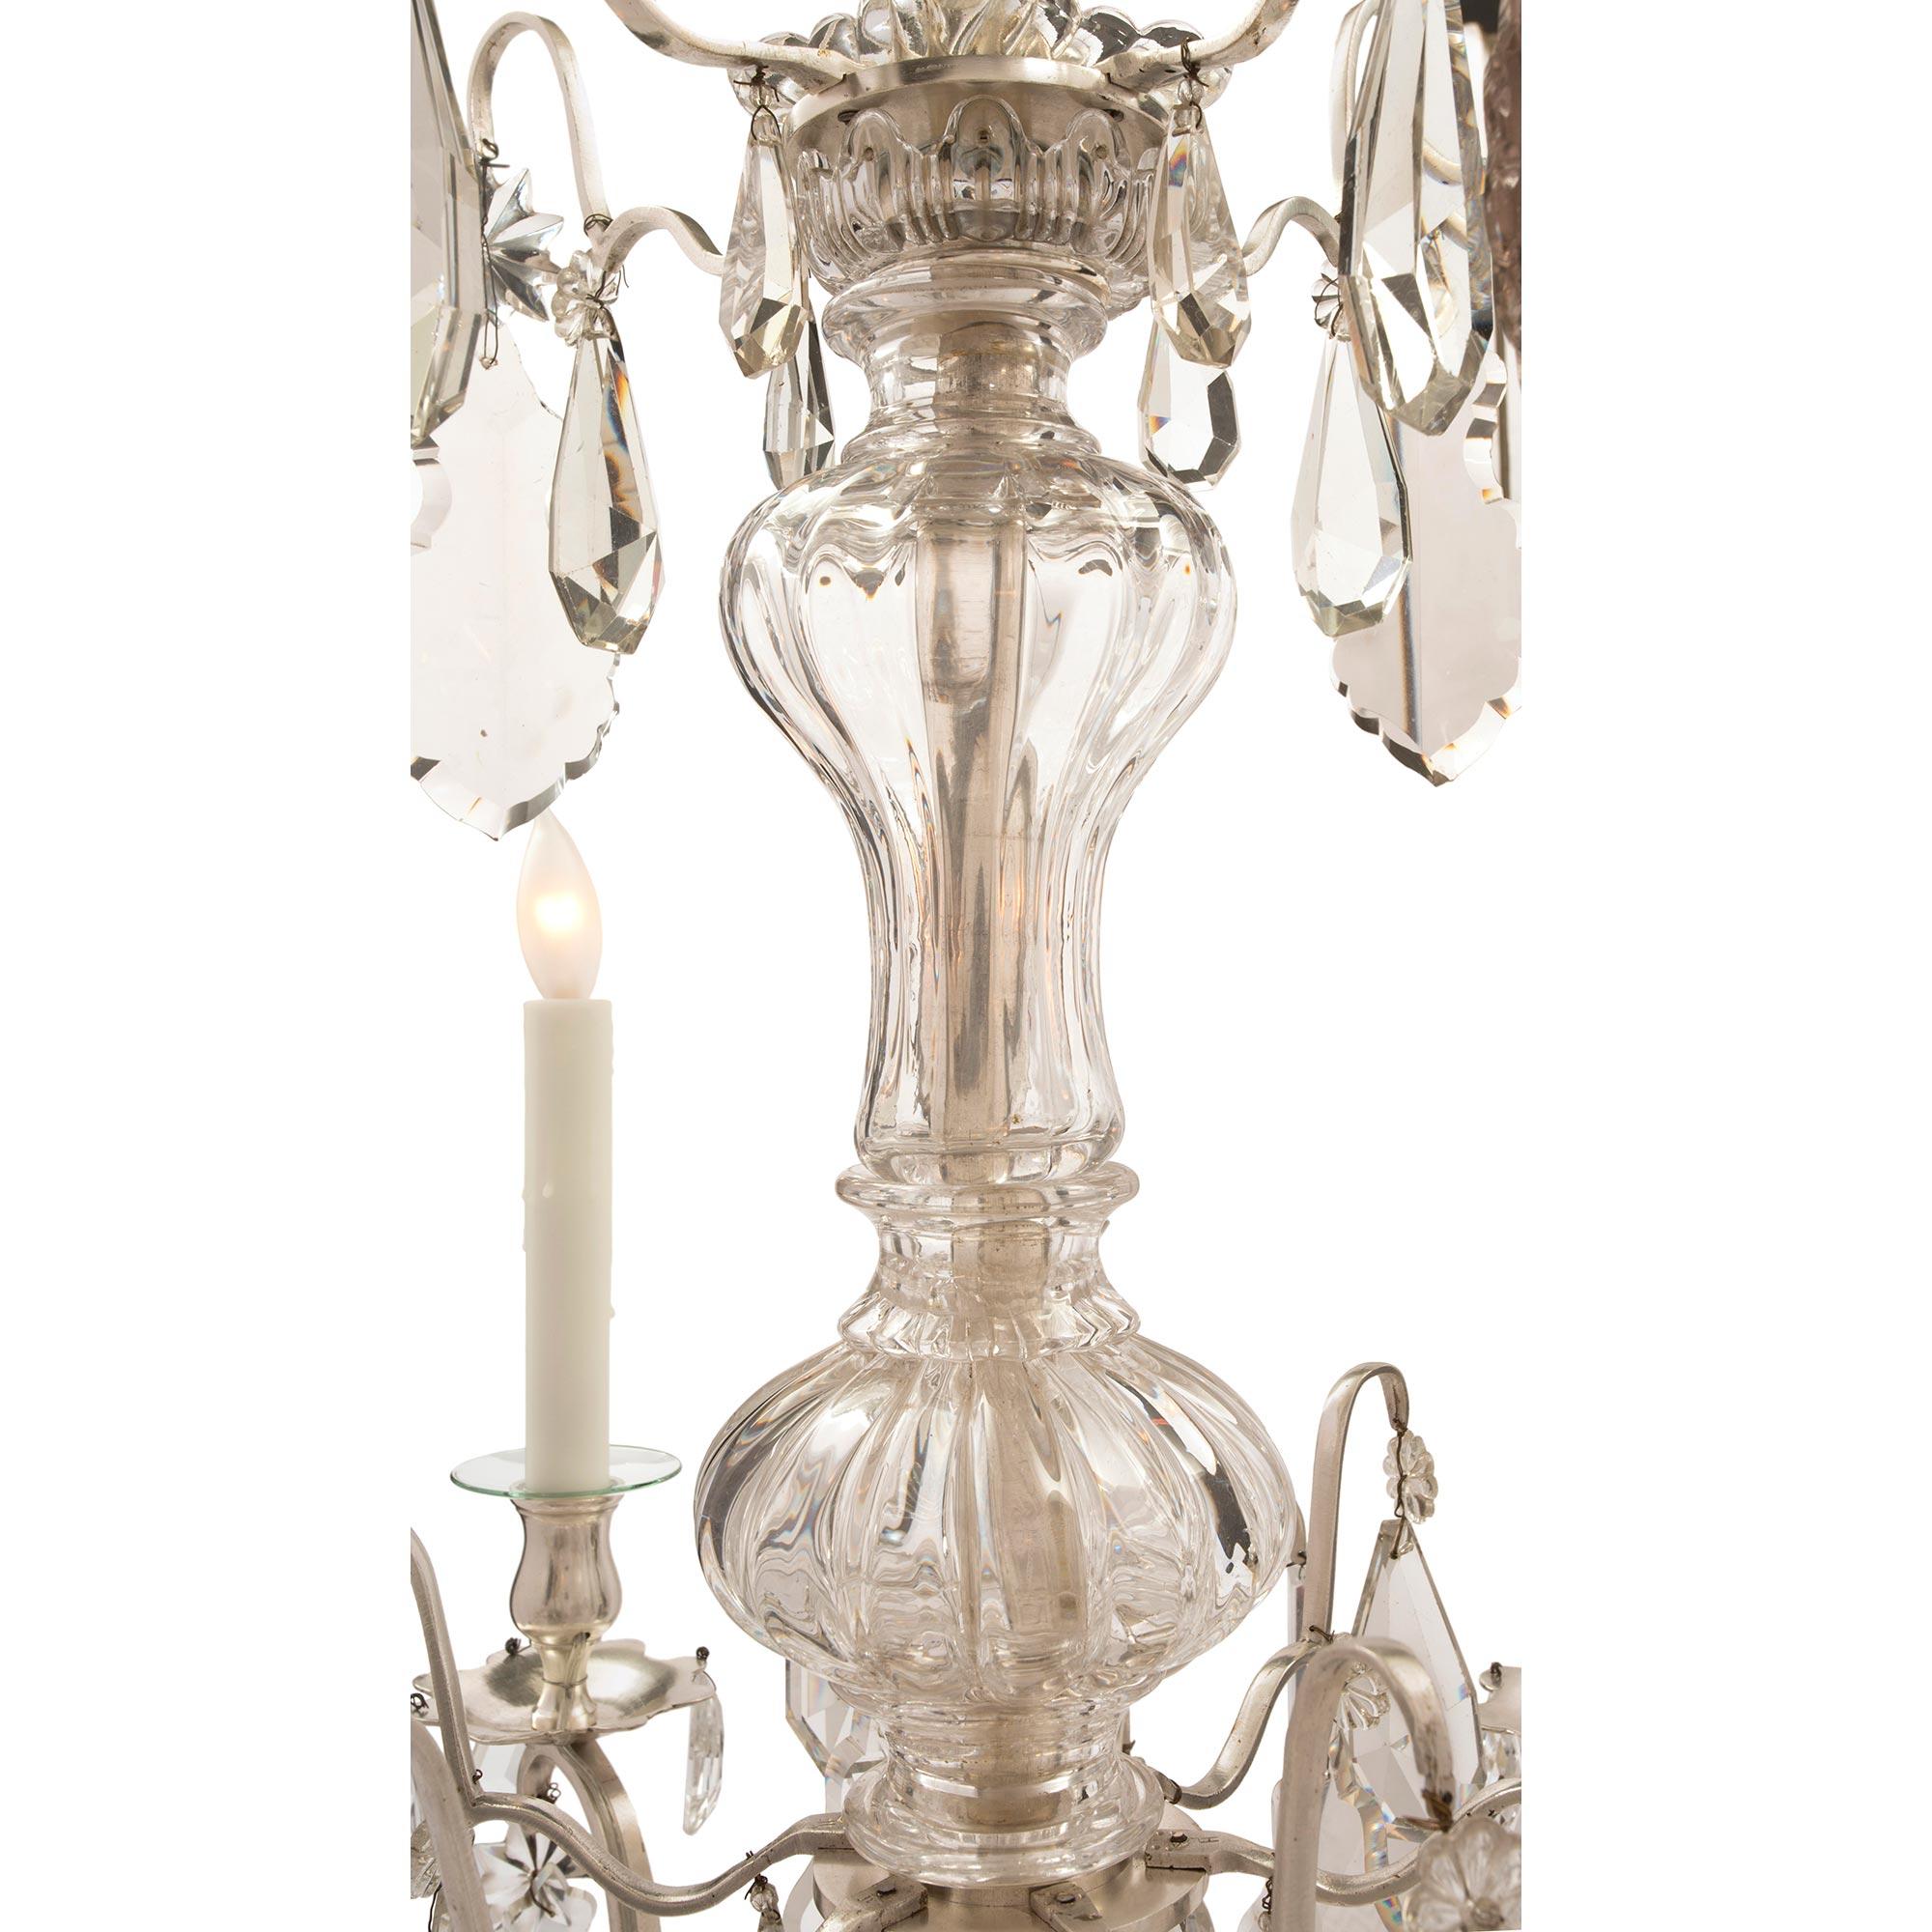 French Mid-19th Century Louis XV Style Bronze and Baccarat Crystal Chandelier In Good Condition For Sale In West Palm Beach, FL